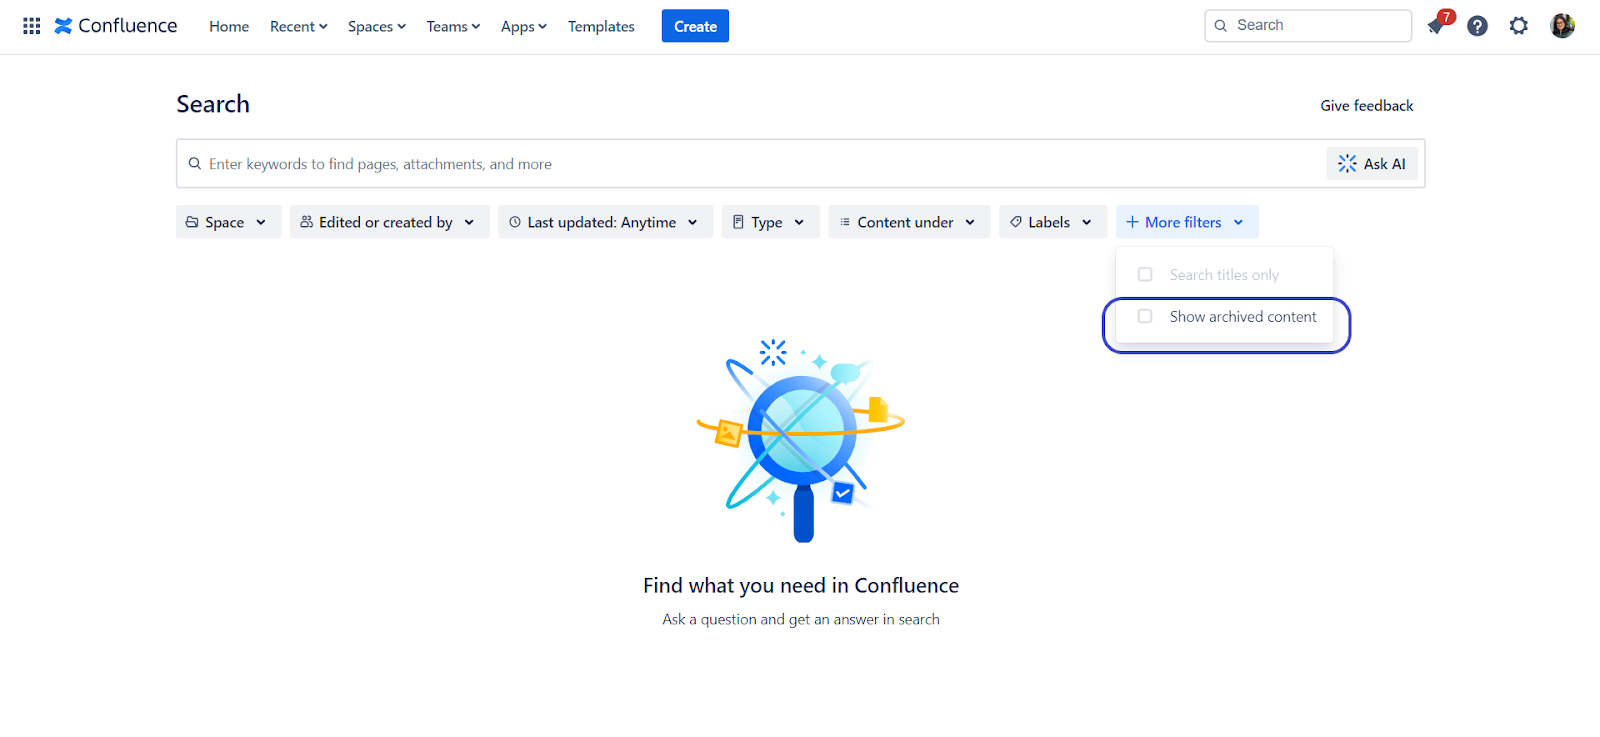 show archived content in Confluence search